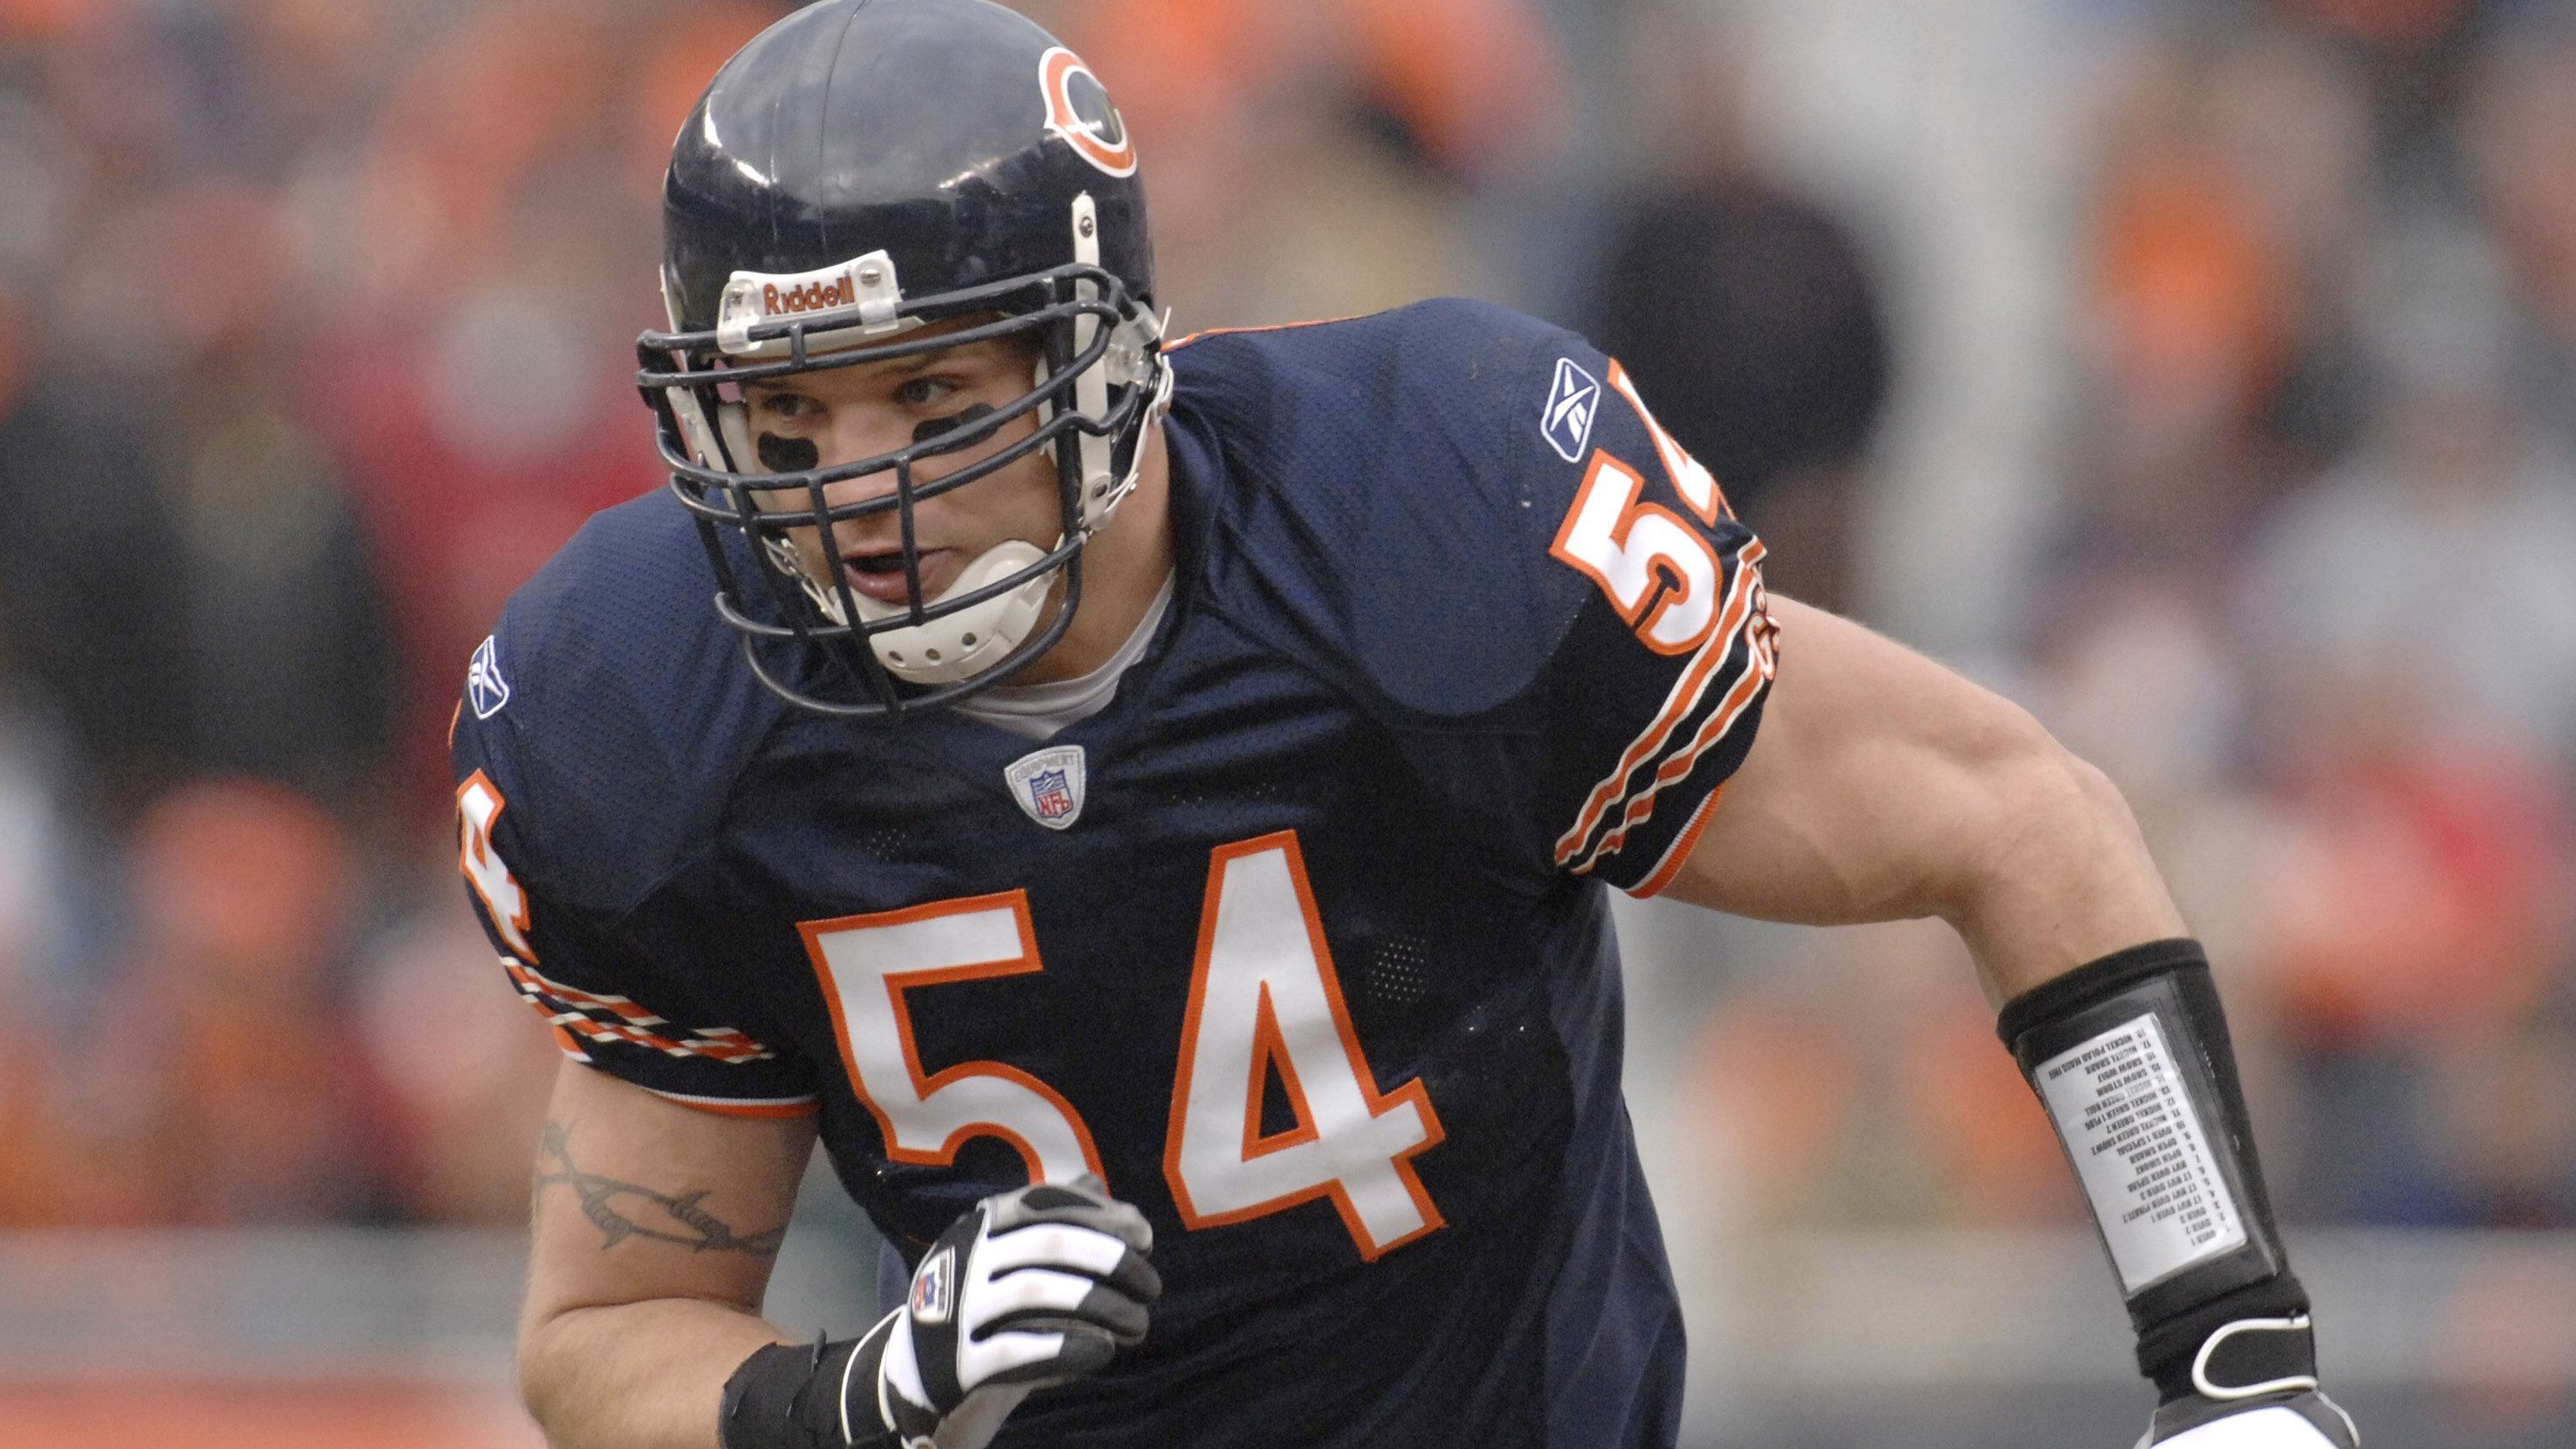 <strong>54: Brian Urlacher</strong><br>Team: Chicago Bears<br>Position: Linebacker<br>Erfolge: Pro Football Hall of Famer, NFL Defensive Player of the Year 2005, viermaliger First Team All-Pro, achtmaliger Pro Bowler<br>Honorable Mention: Randy White, Bobby Wagner